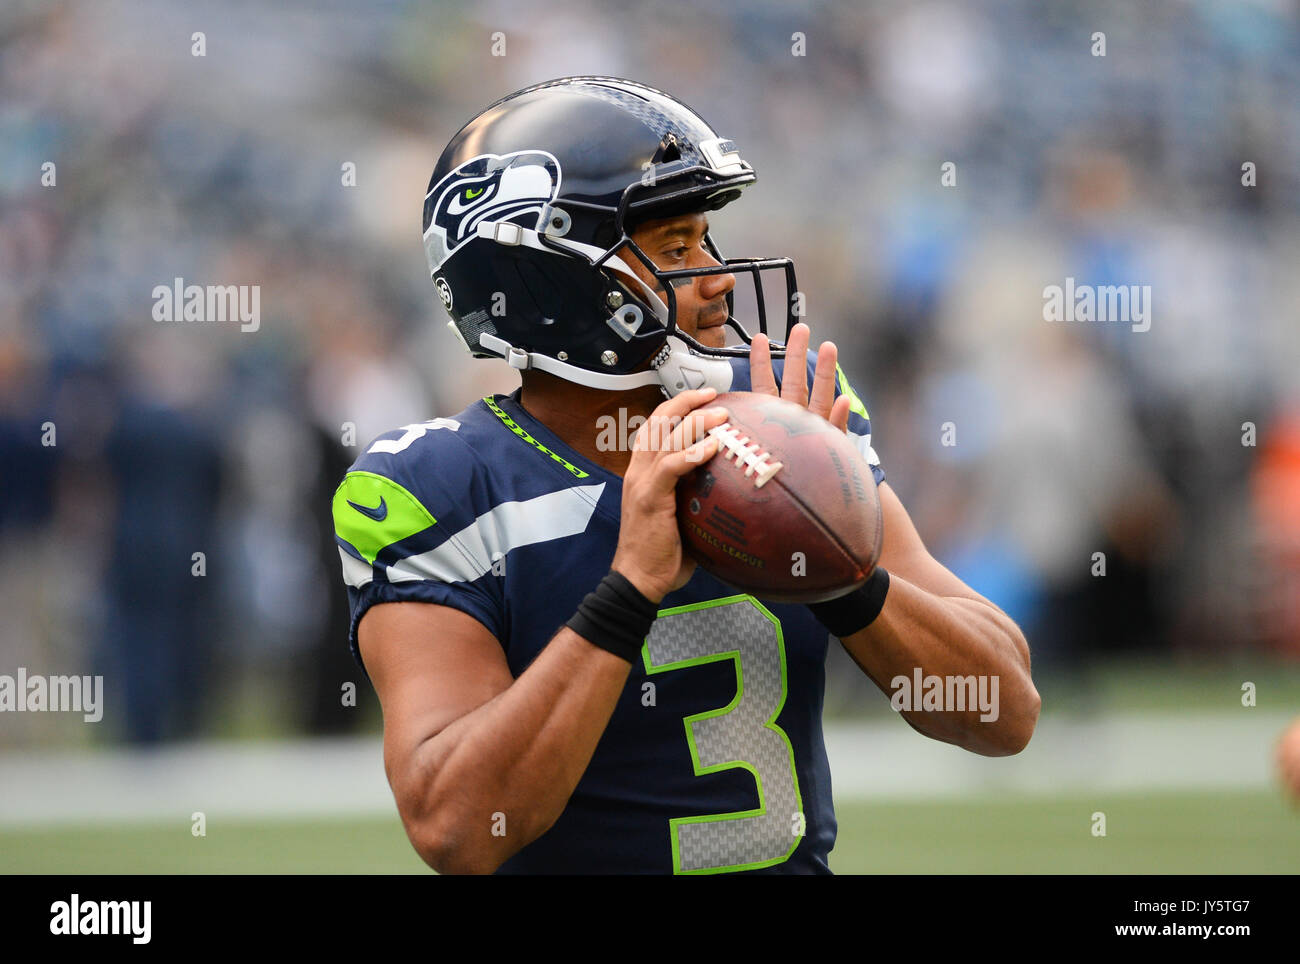 August 18, 2017: Seattle quarterback Russell Wilson (3) during warmups before an NFL pre-season game between the Seattle Seahawks and the Minnesota Vikings. The game was played at Century Link Field in Seattle, WA. © Jeff Halstead/CSM Stock Photo